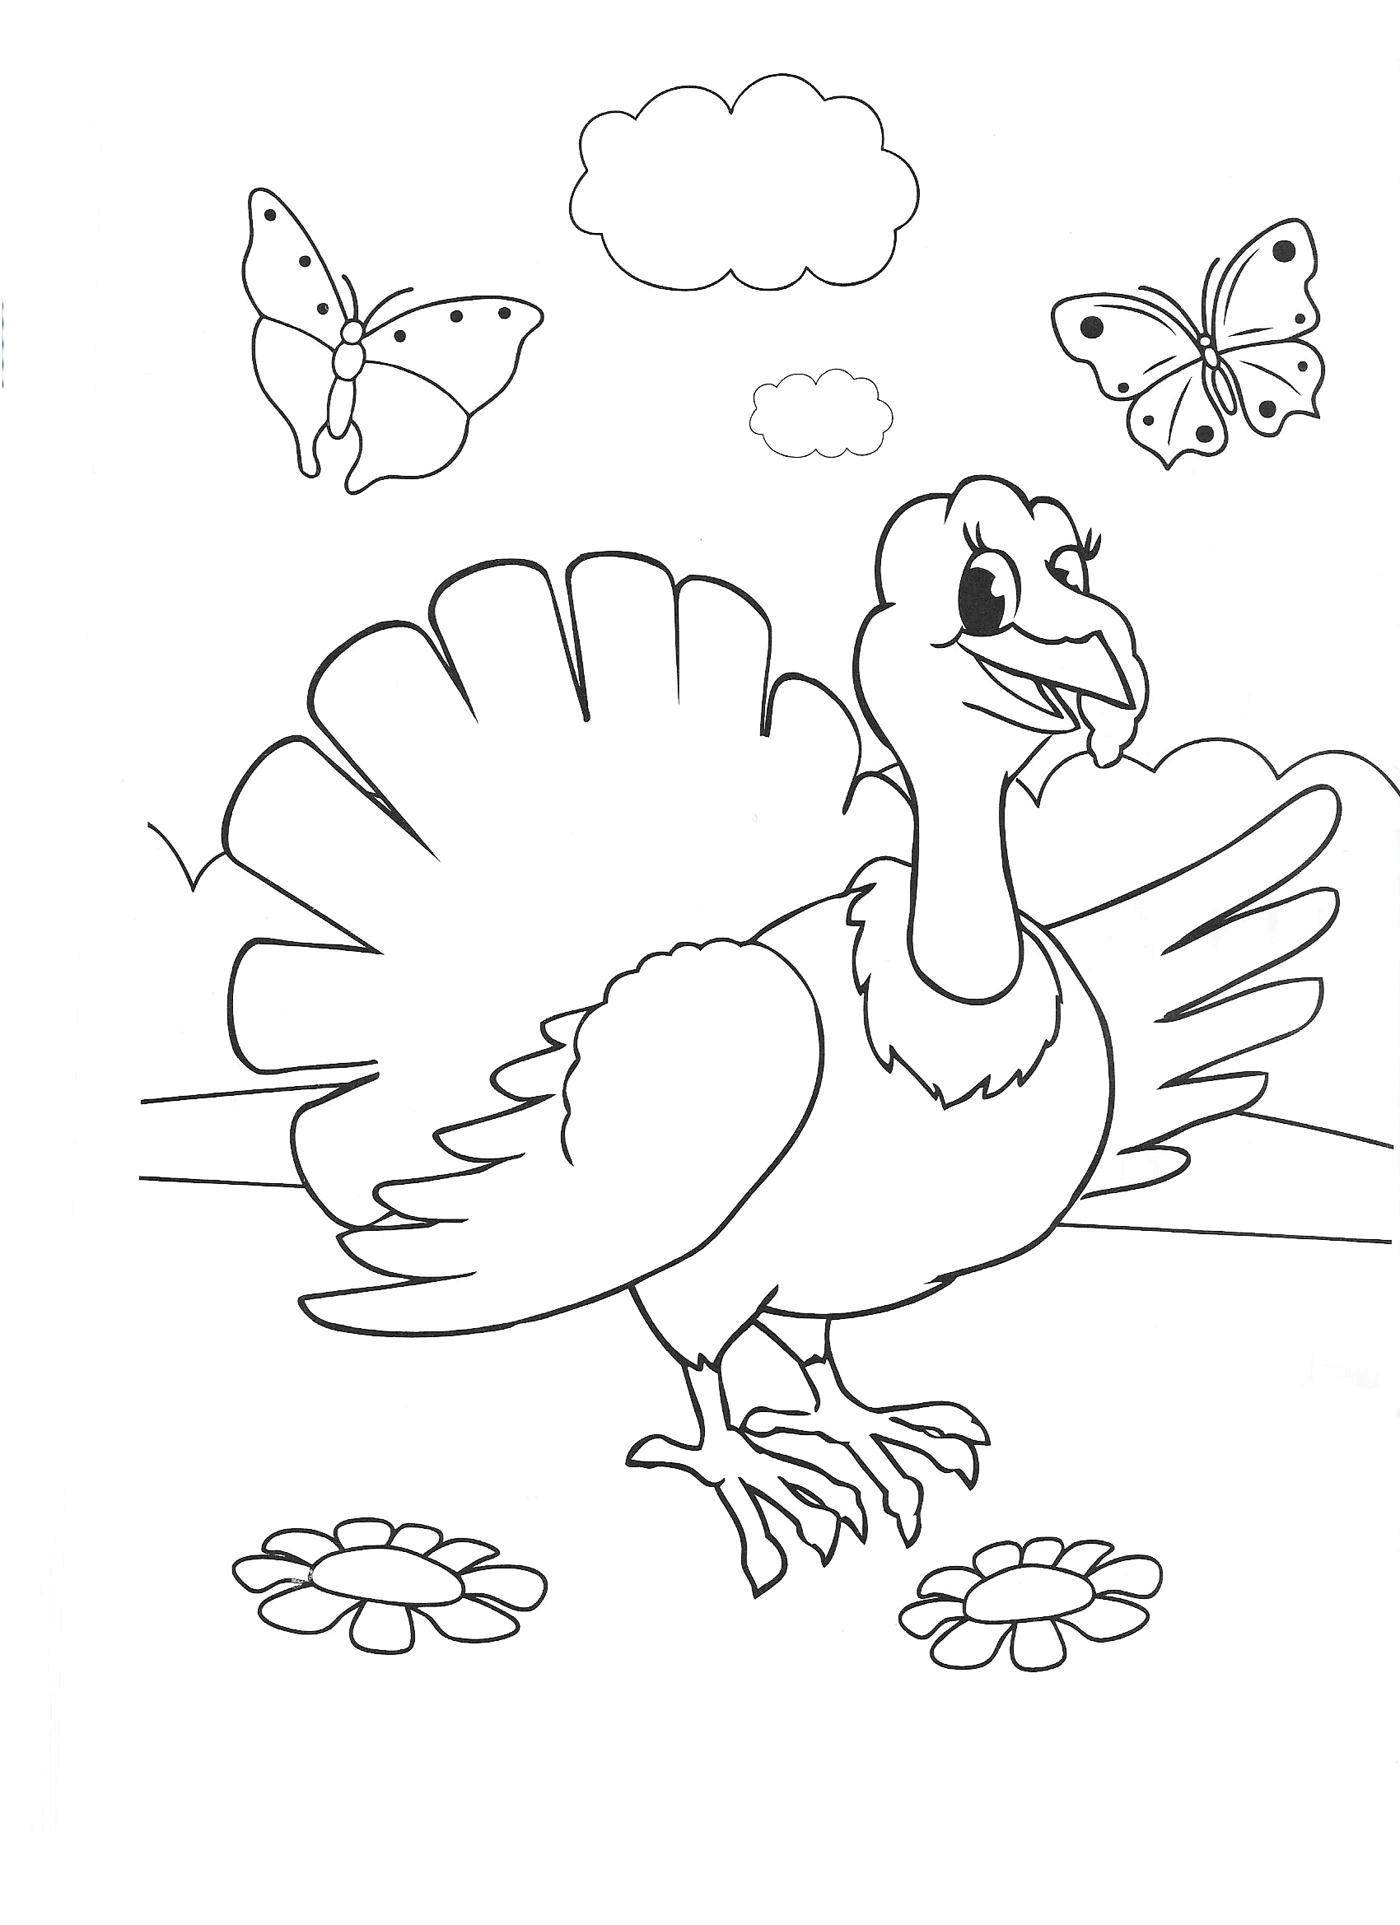 Coloring Turkeys and butterflies. Category birds. Tags:  Poultry, Turkey.